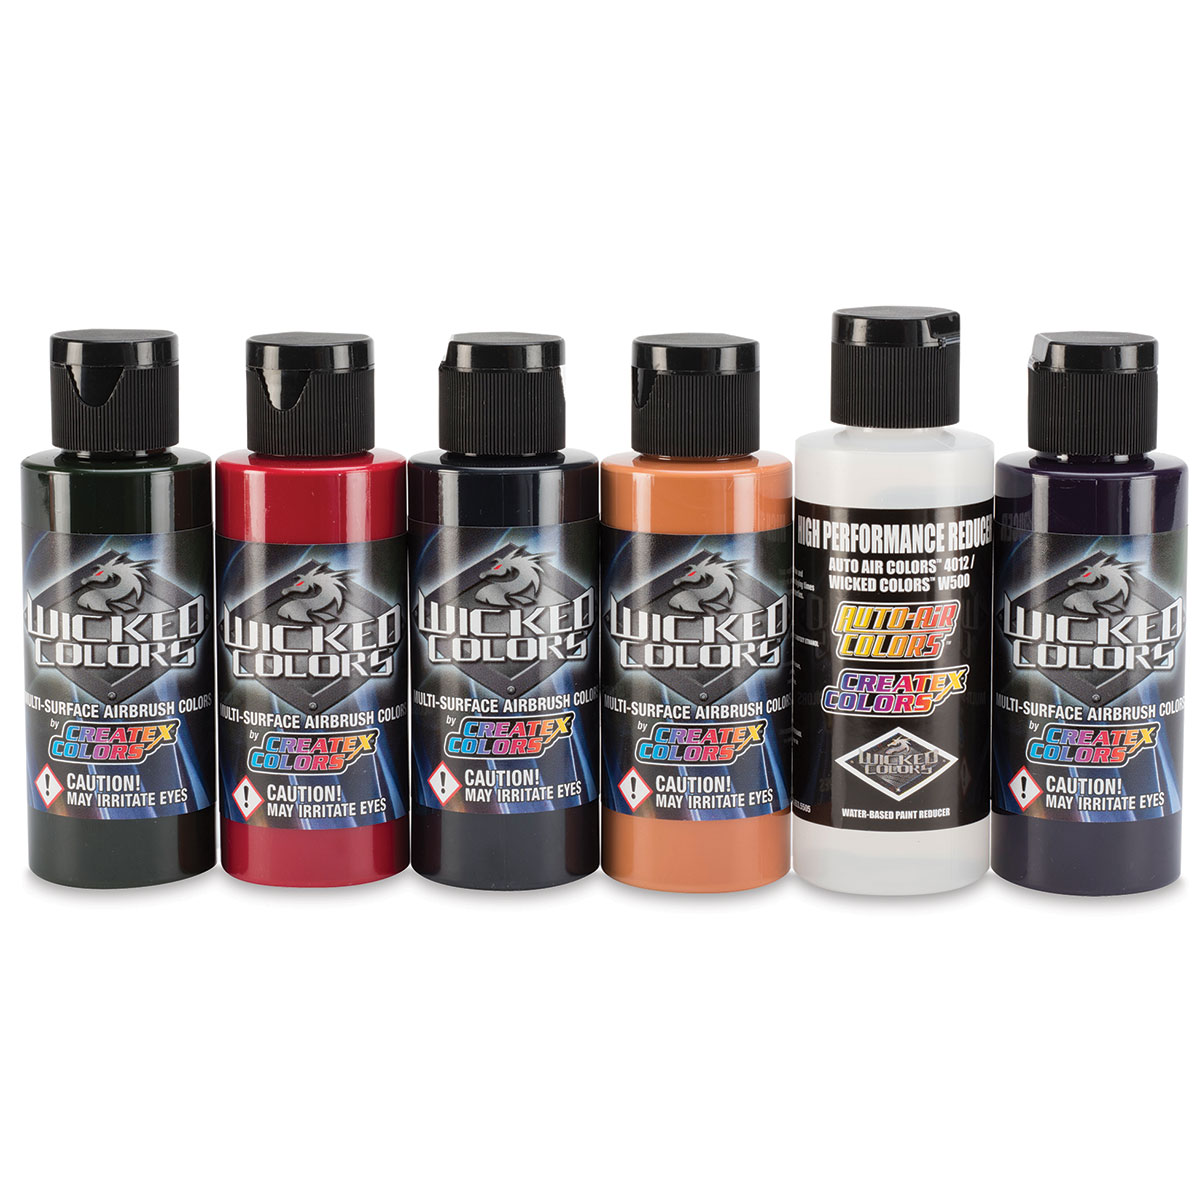 Wicked colors set acrylic paint set